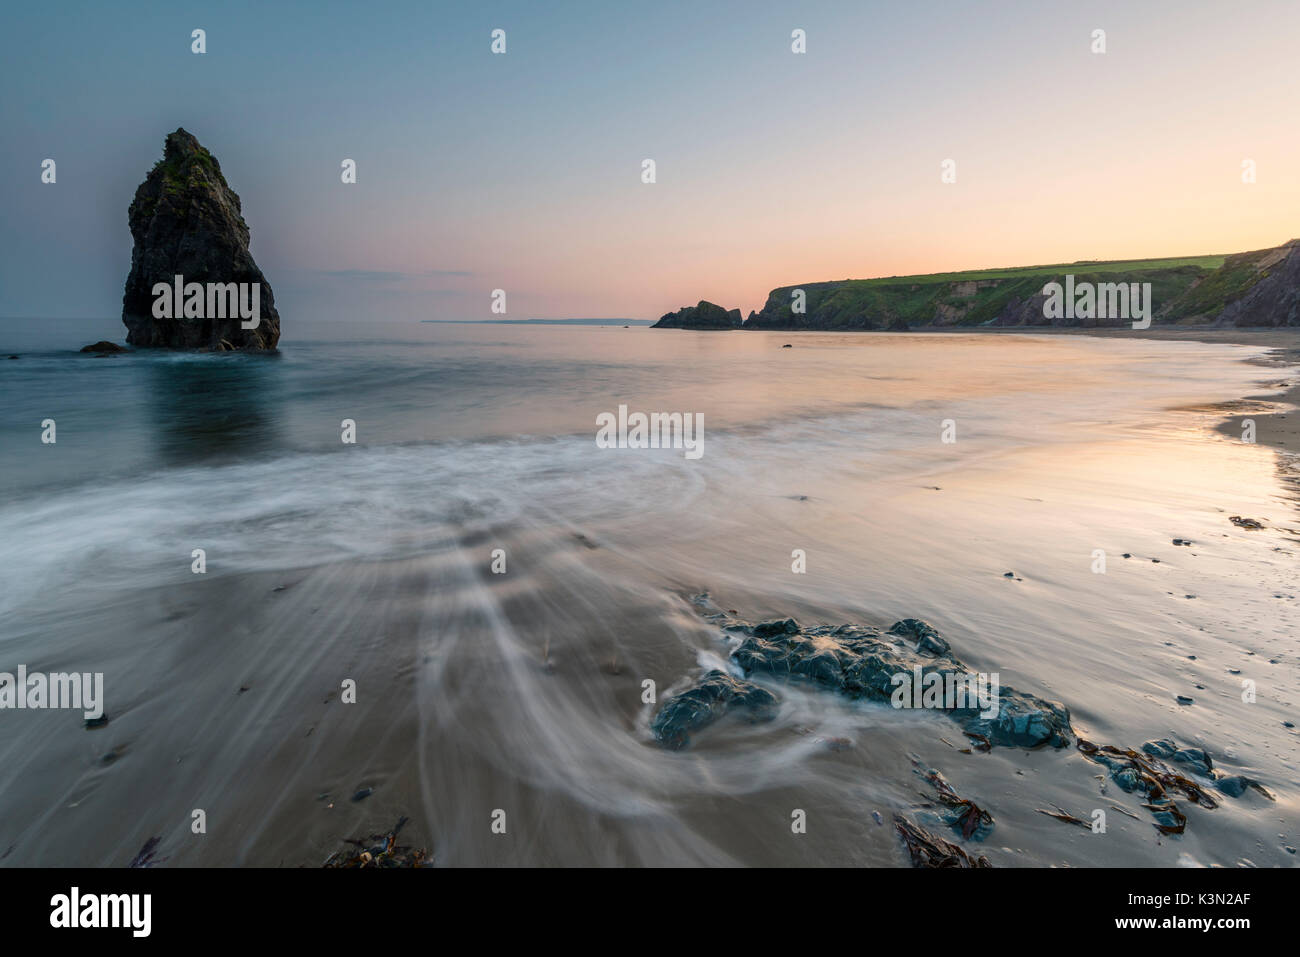 Ballydowane Cove, County Waterford, Munster province, Ireland, Europe. The sea stack in the ocean with the high tide. Stock Photo